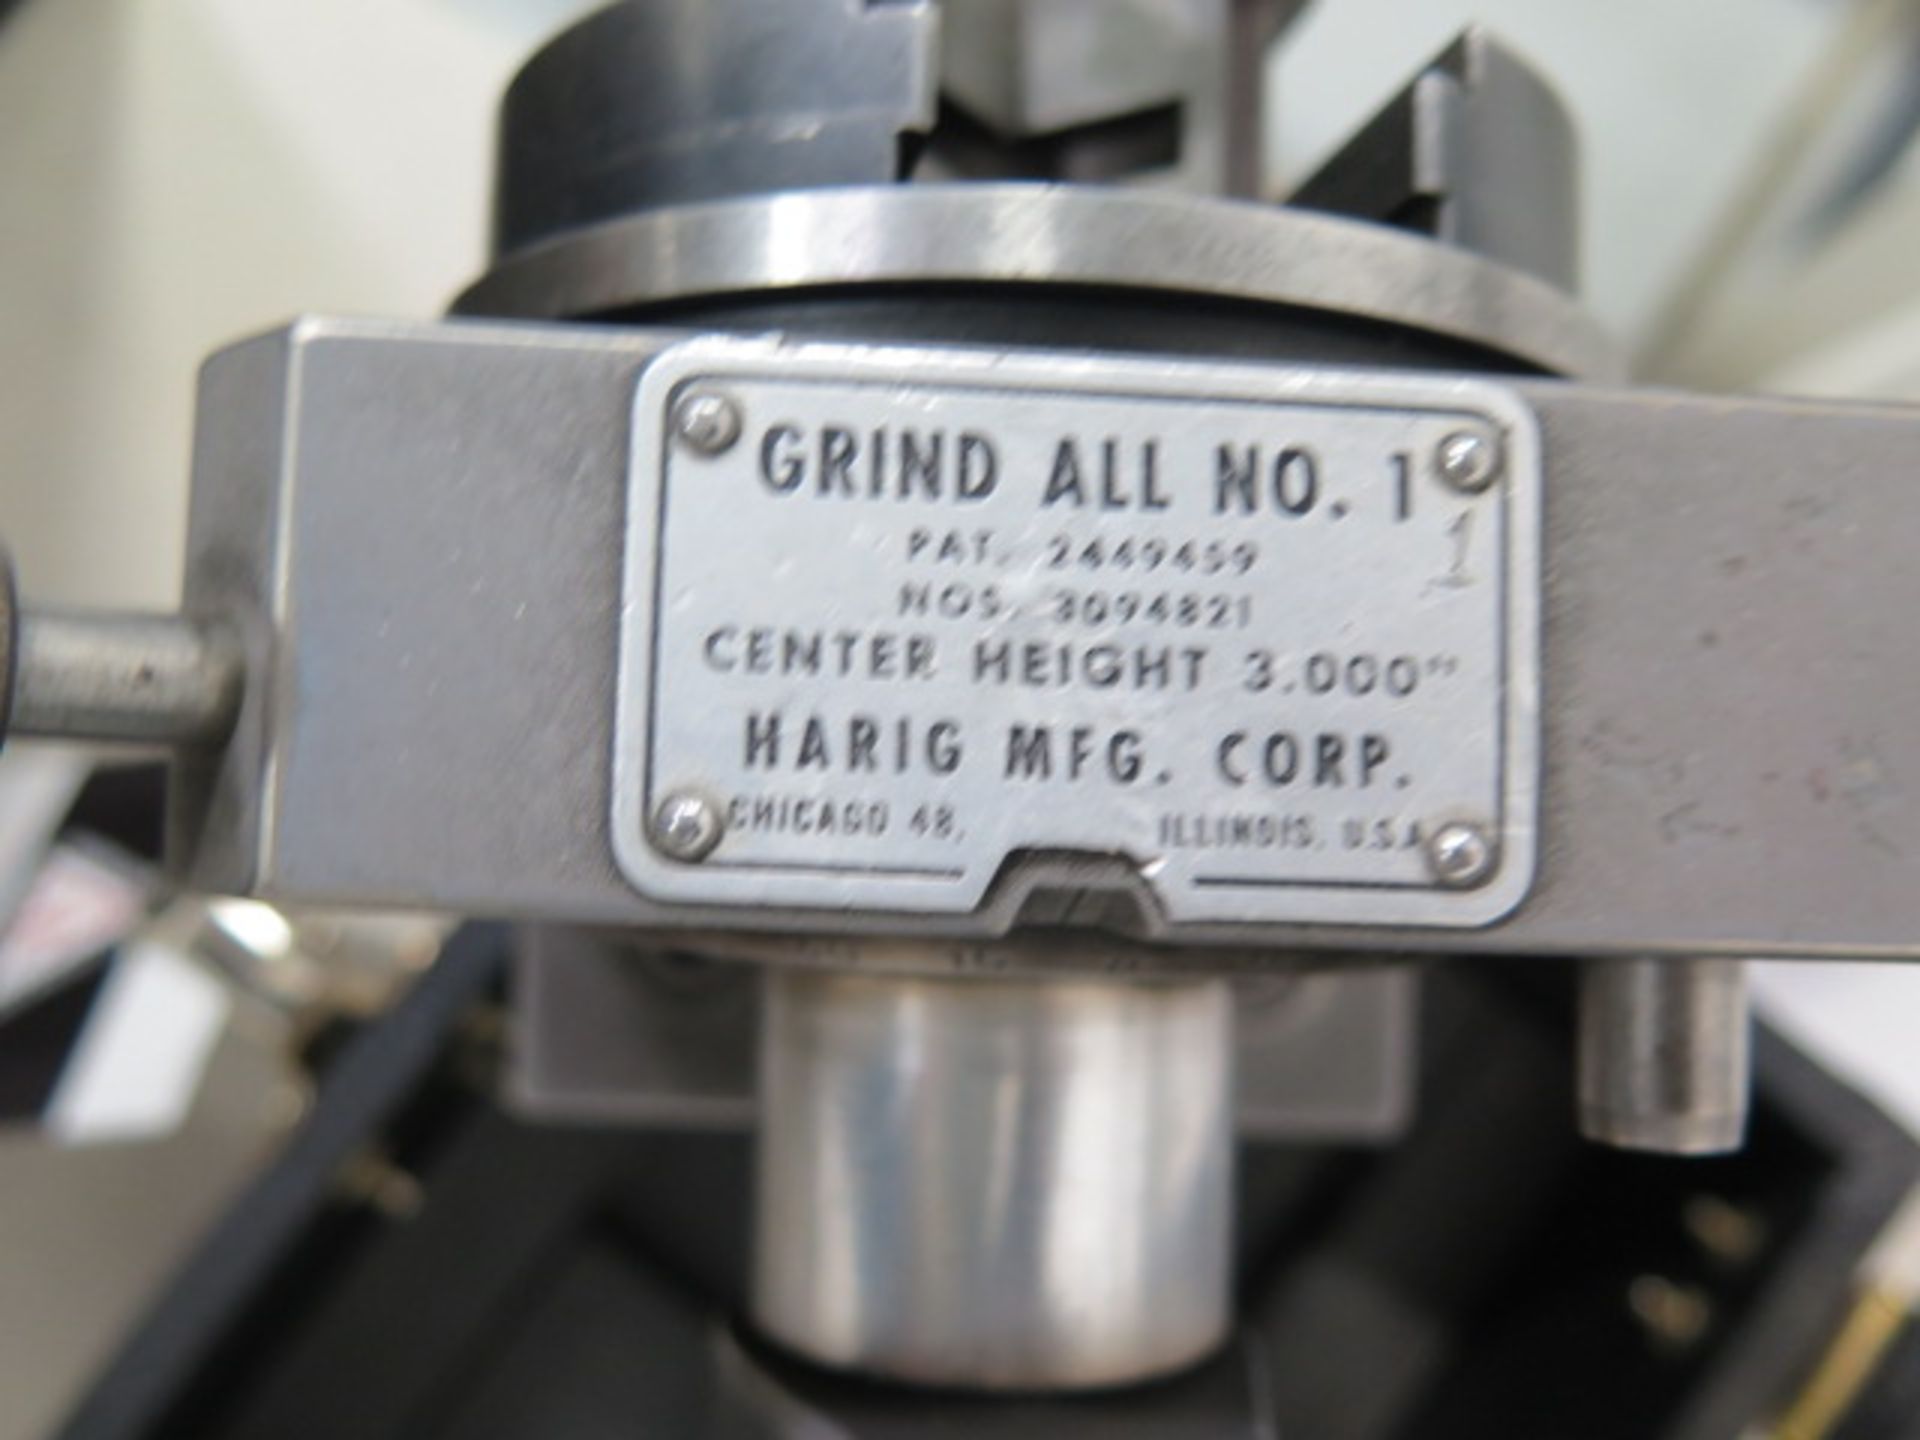 Harig Grind-All No.1 Precision Grinding Fixture (SOLD AS-IS - NO WARRANTY) - Image 6 of 6